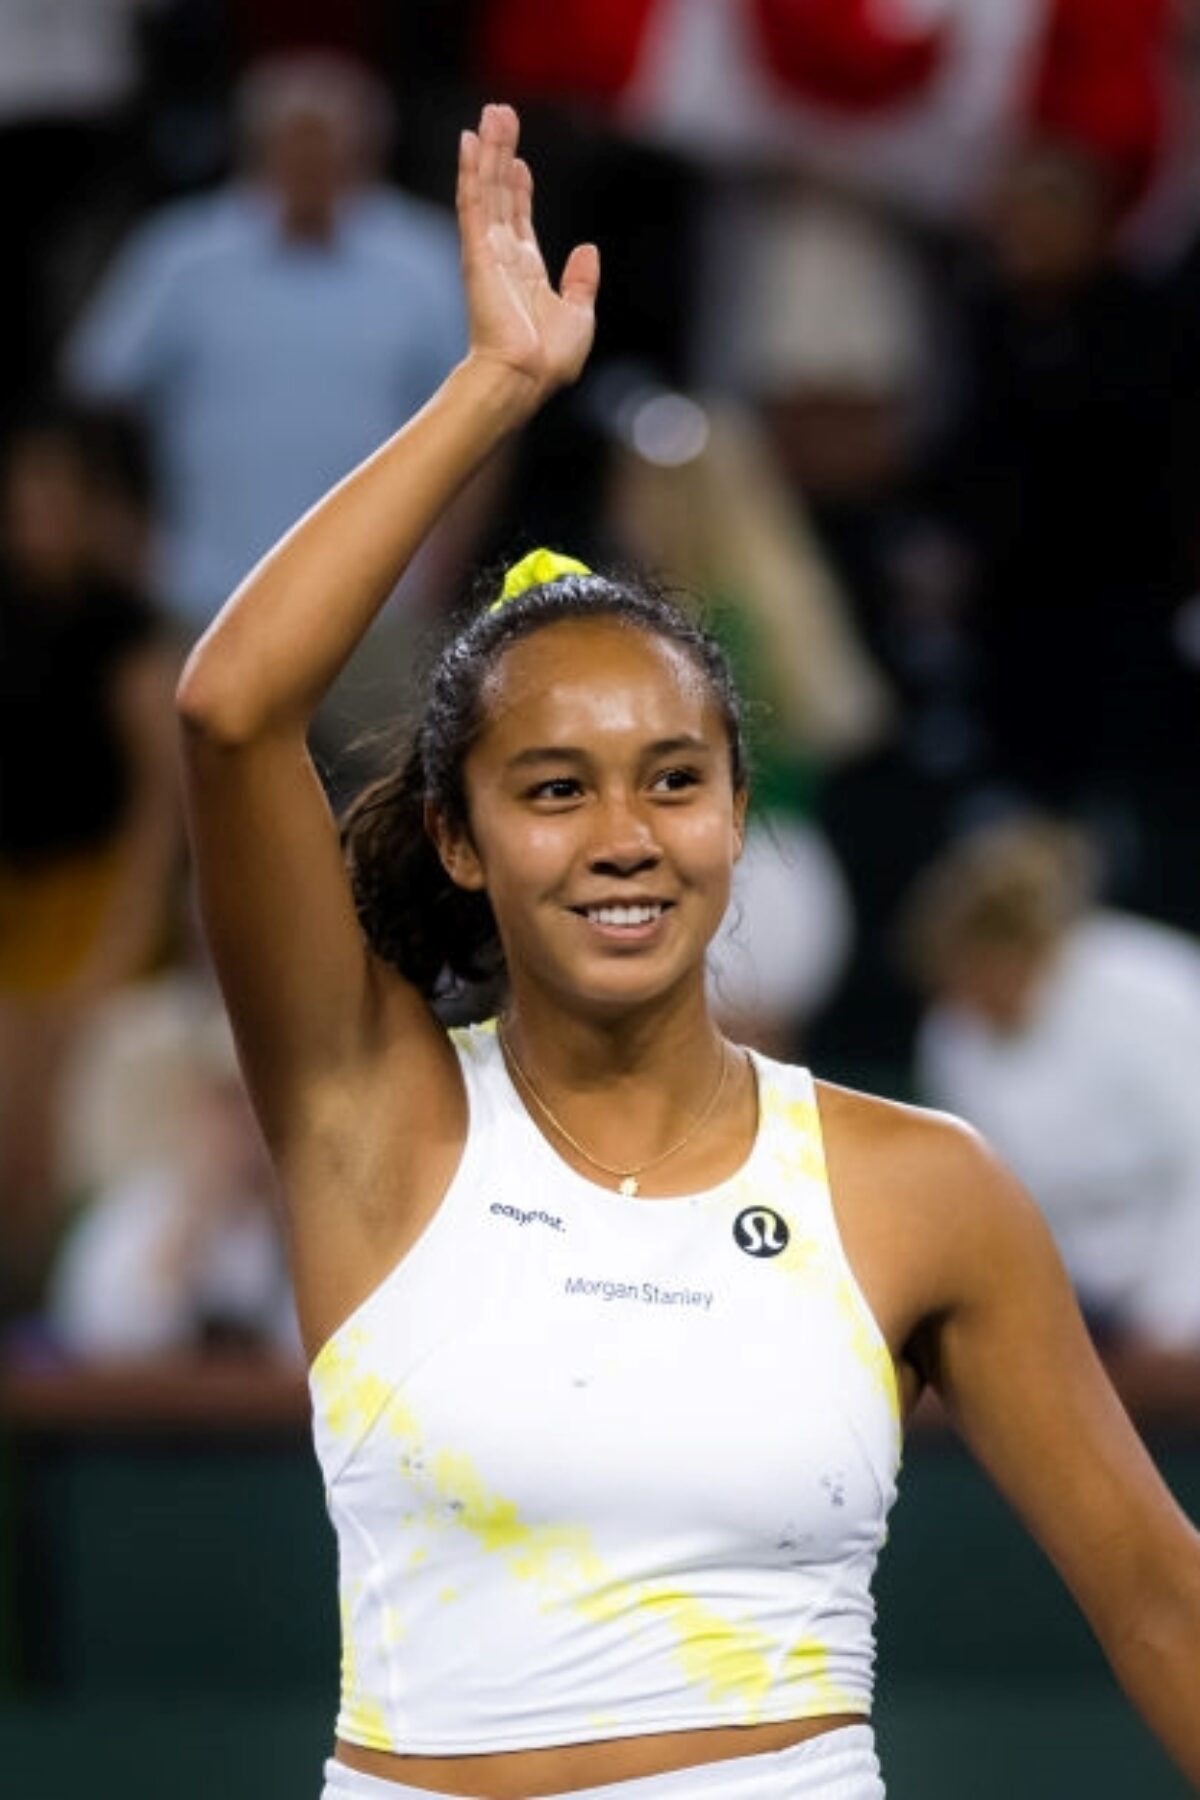 INDIAN WELLS, CALIFORNIA - MARCH 14: Leylah Fernandez of Canada celebrates defeating Shelby Rogers of the United States in her third-round match at the 2022 BNP Paribas Open at the Indian Wells Tennis Garden on March 14, 2022 in Indian Wells, California (Photo by Robert Prange/Getty Images)